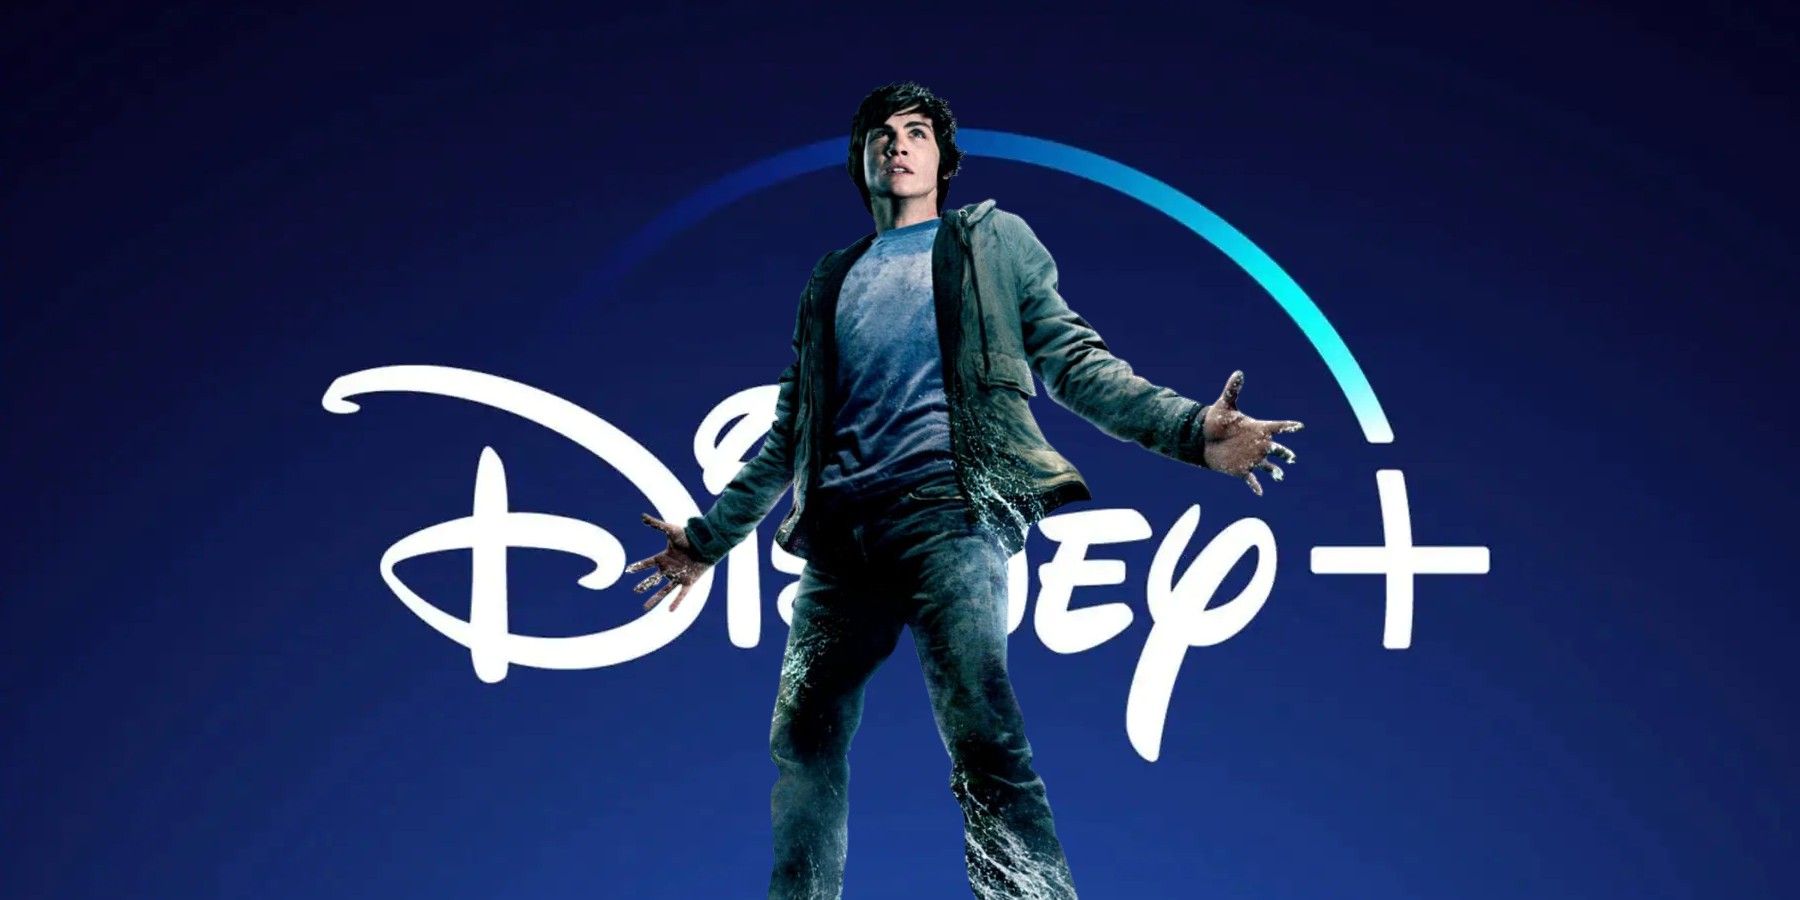 A blended image features the Logan Lerman as Percy Jackson over the Disney+ logo